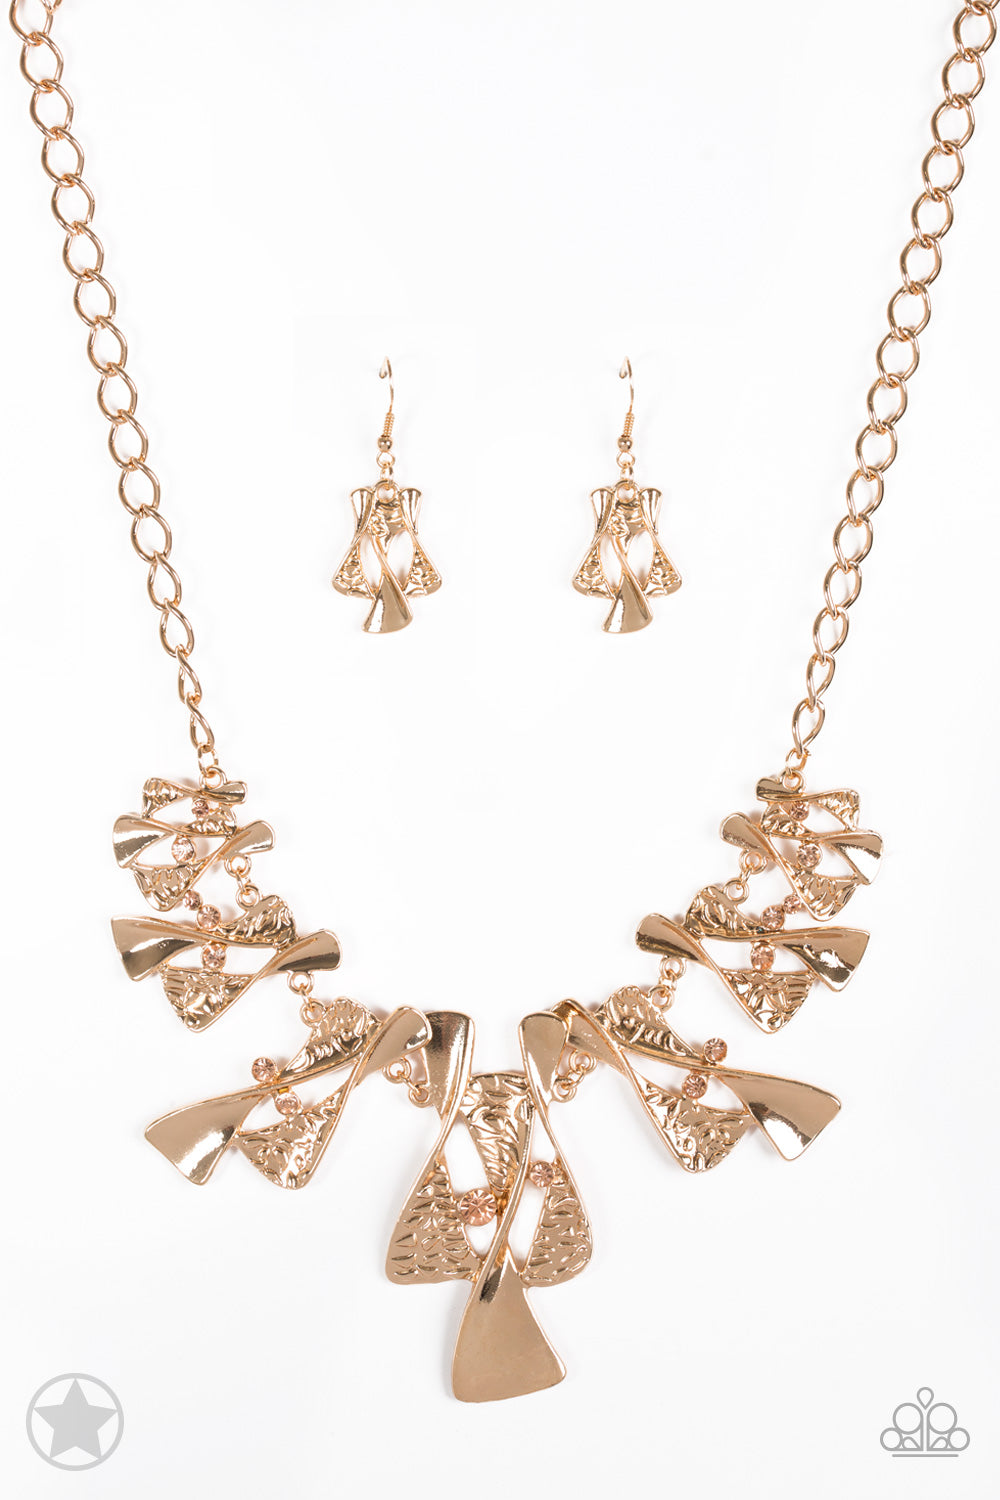 Best Seller!! Sands of Time Gold Necklace with Earrings